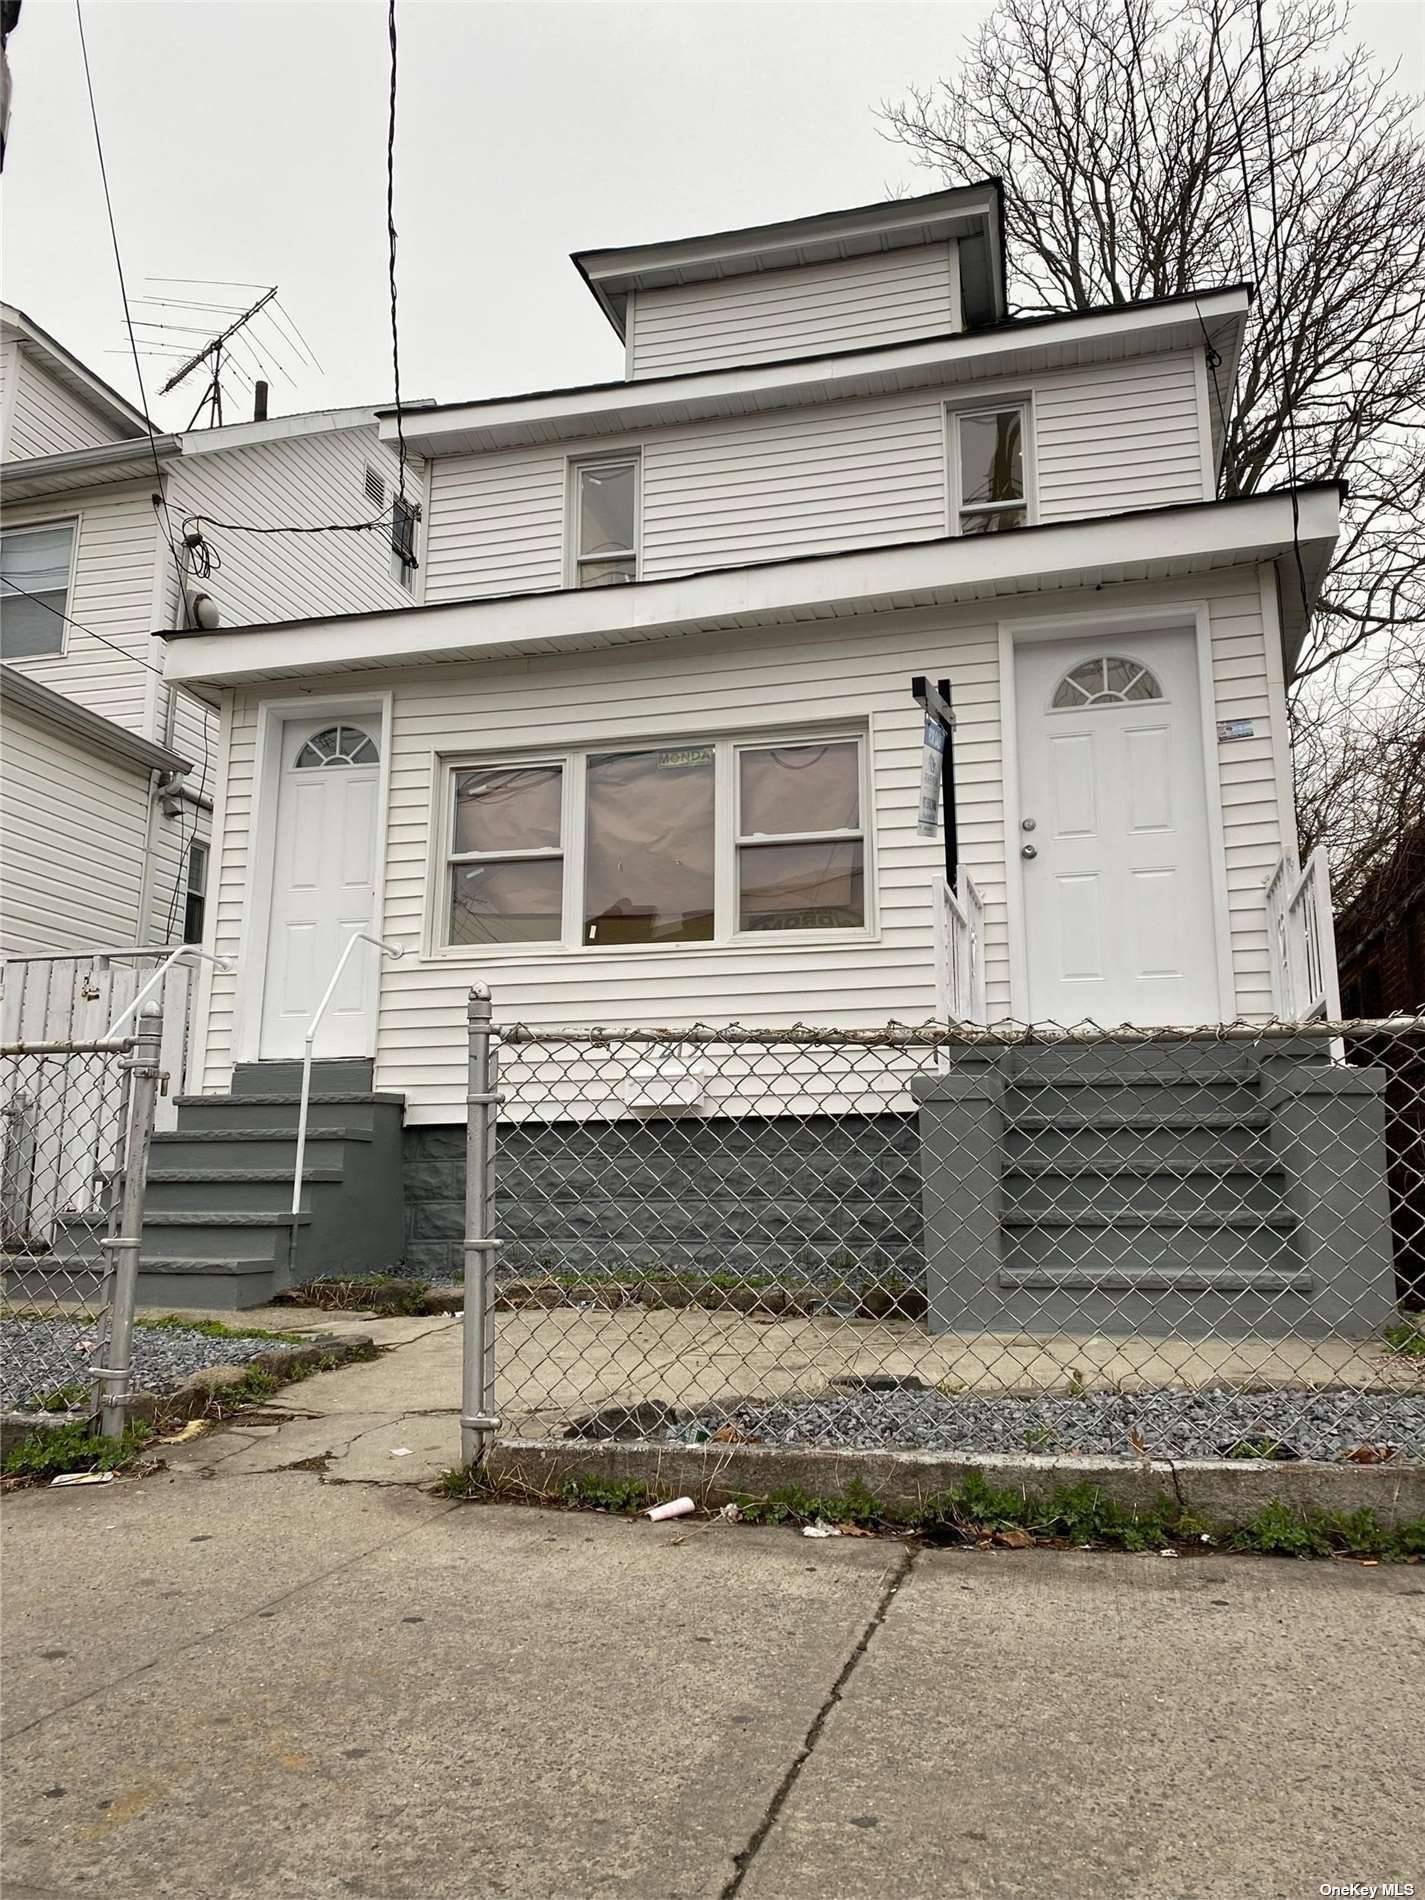 Come Check out this Gut Renovated 2 family property in Canarsie Brooklyn.